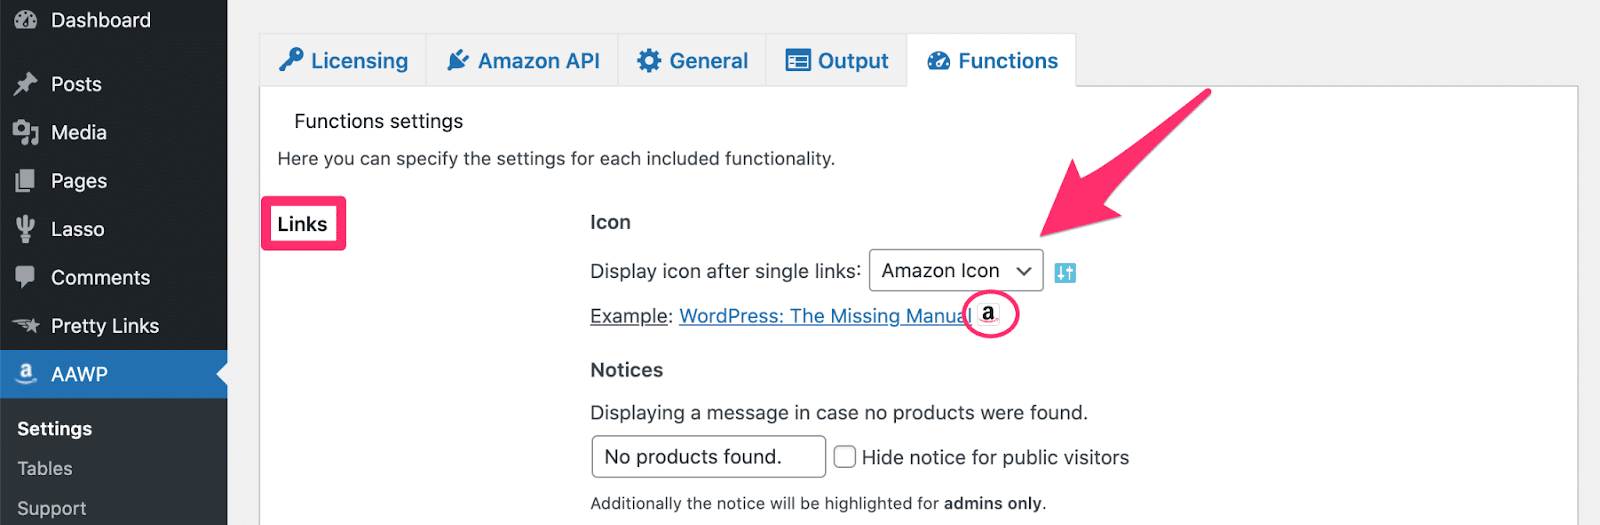 using shortcode to include amazon icon after text links